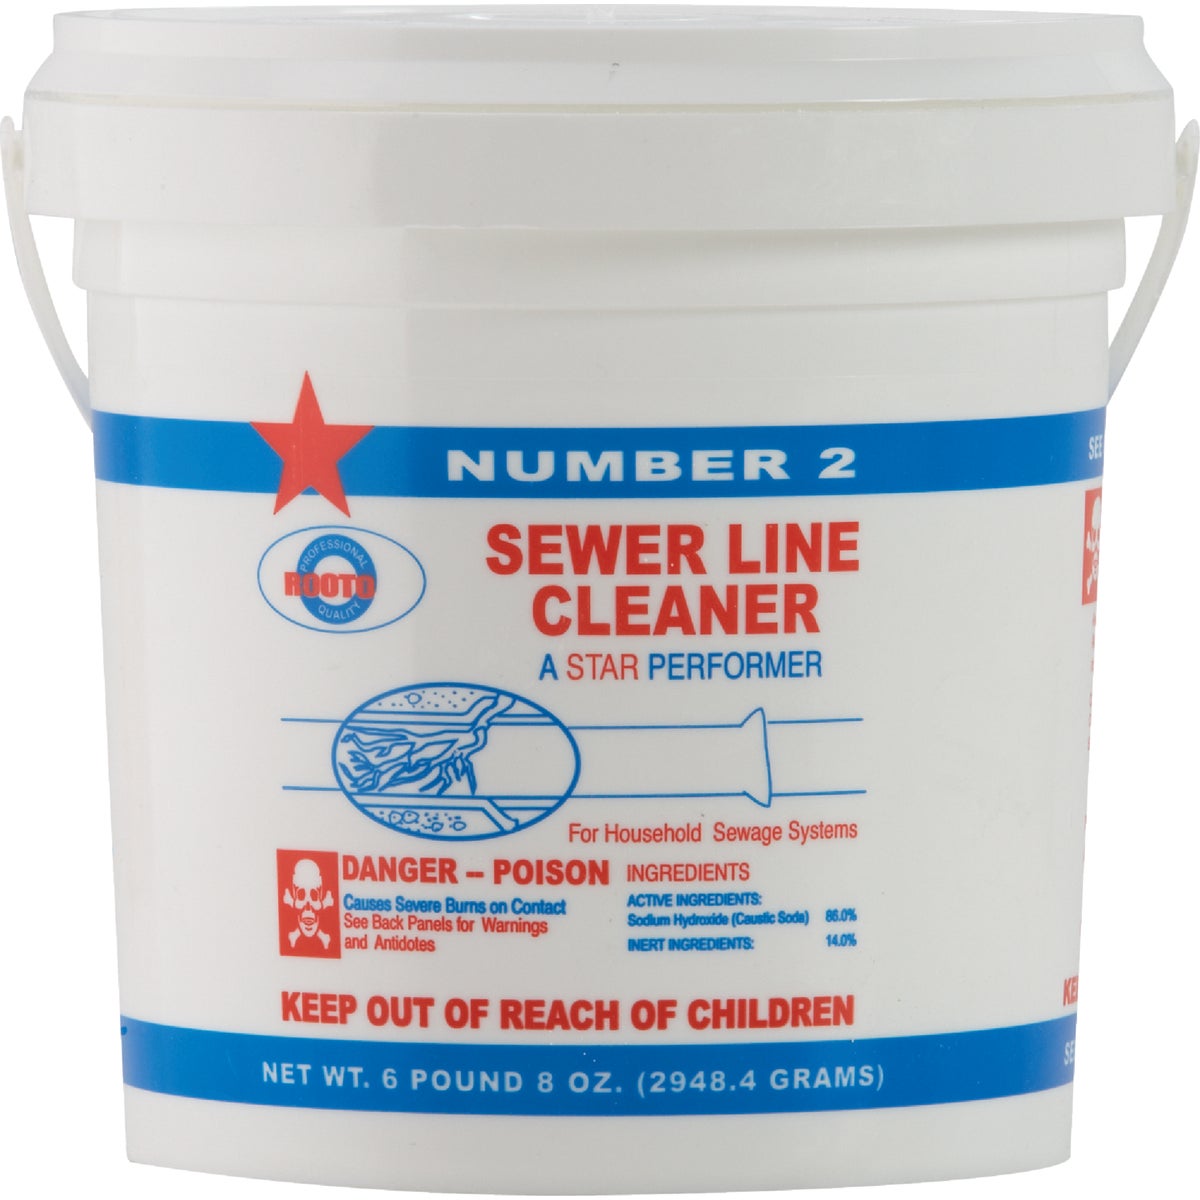 Rooto Sodium Hydroxide 6-1/2 Lb. Sewer Line Cleaner